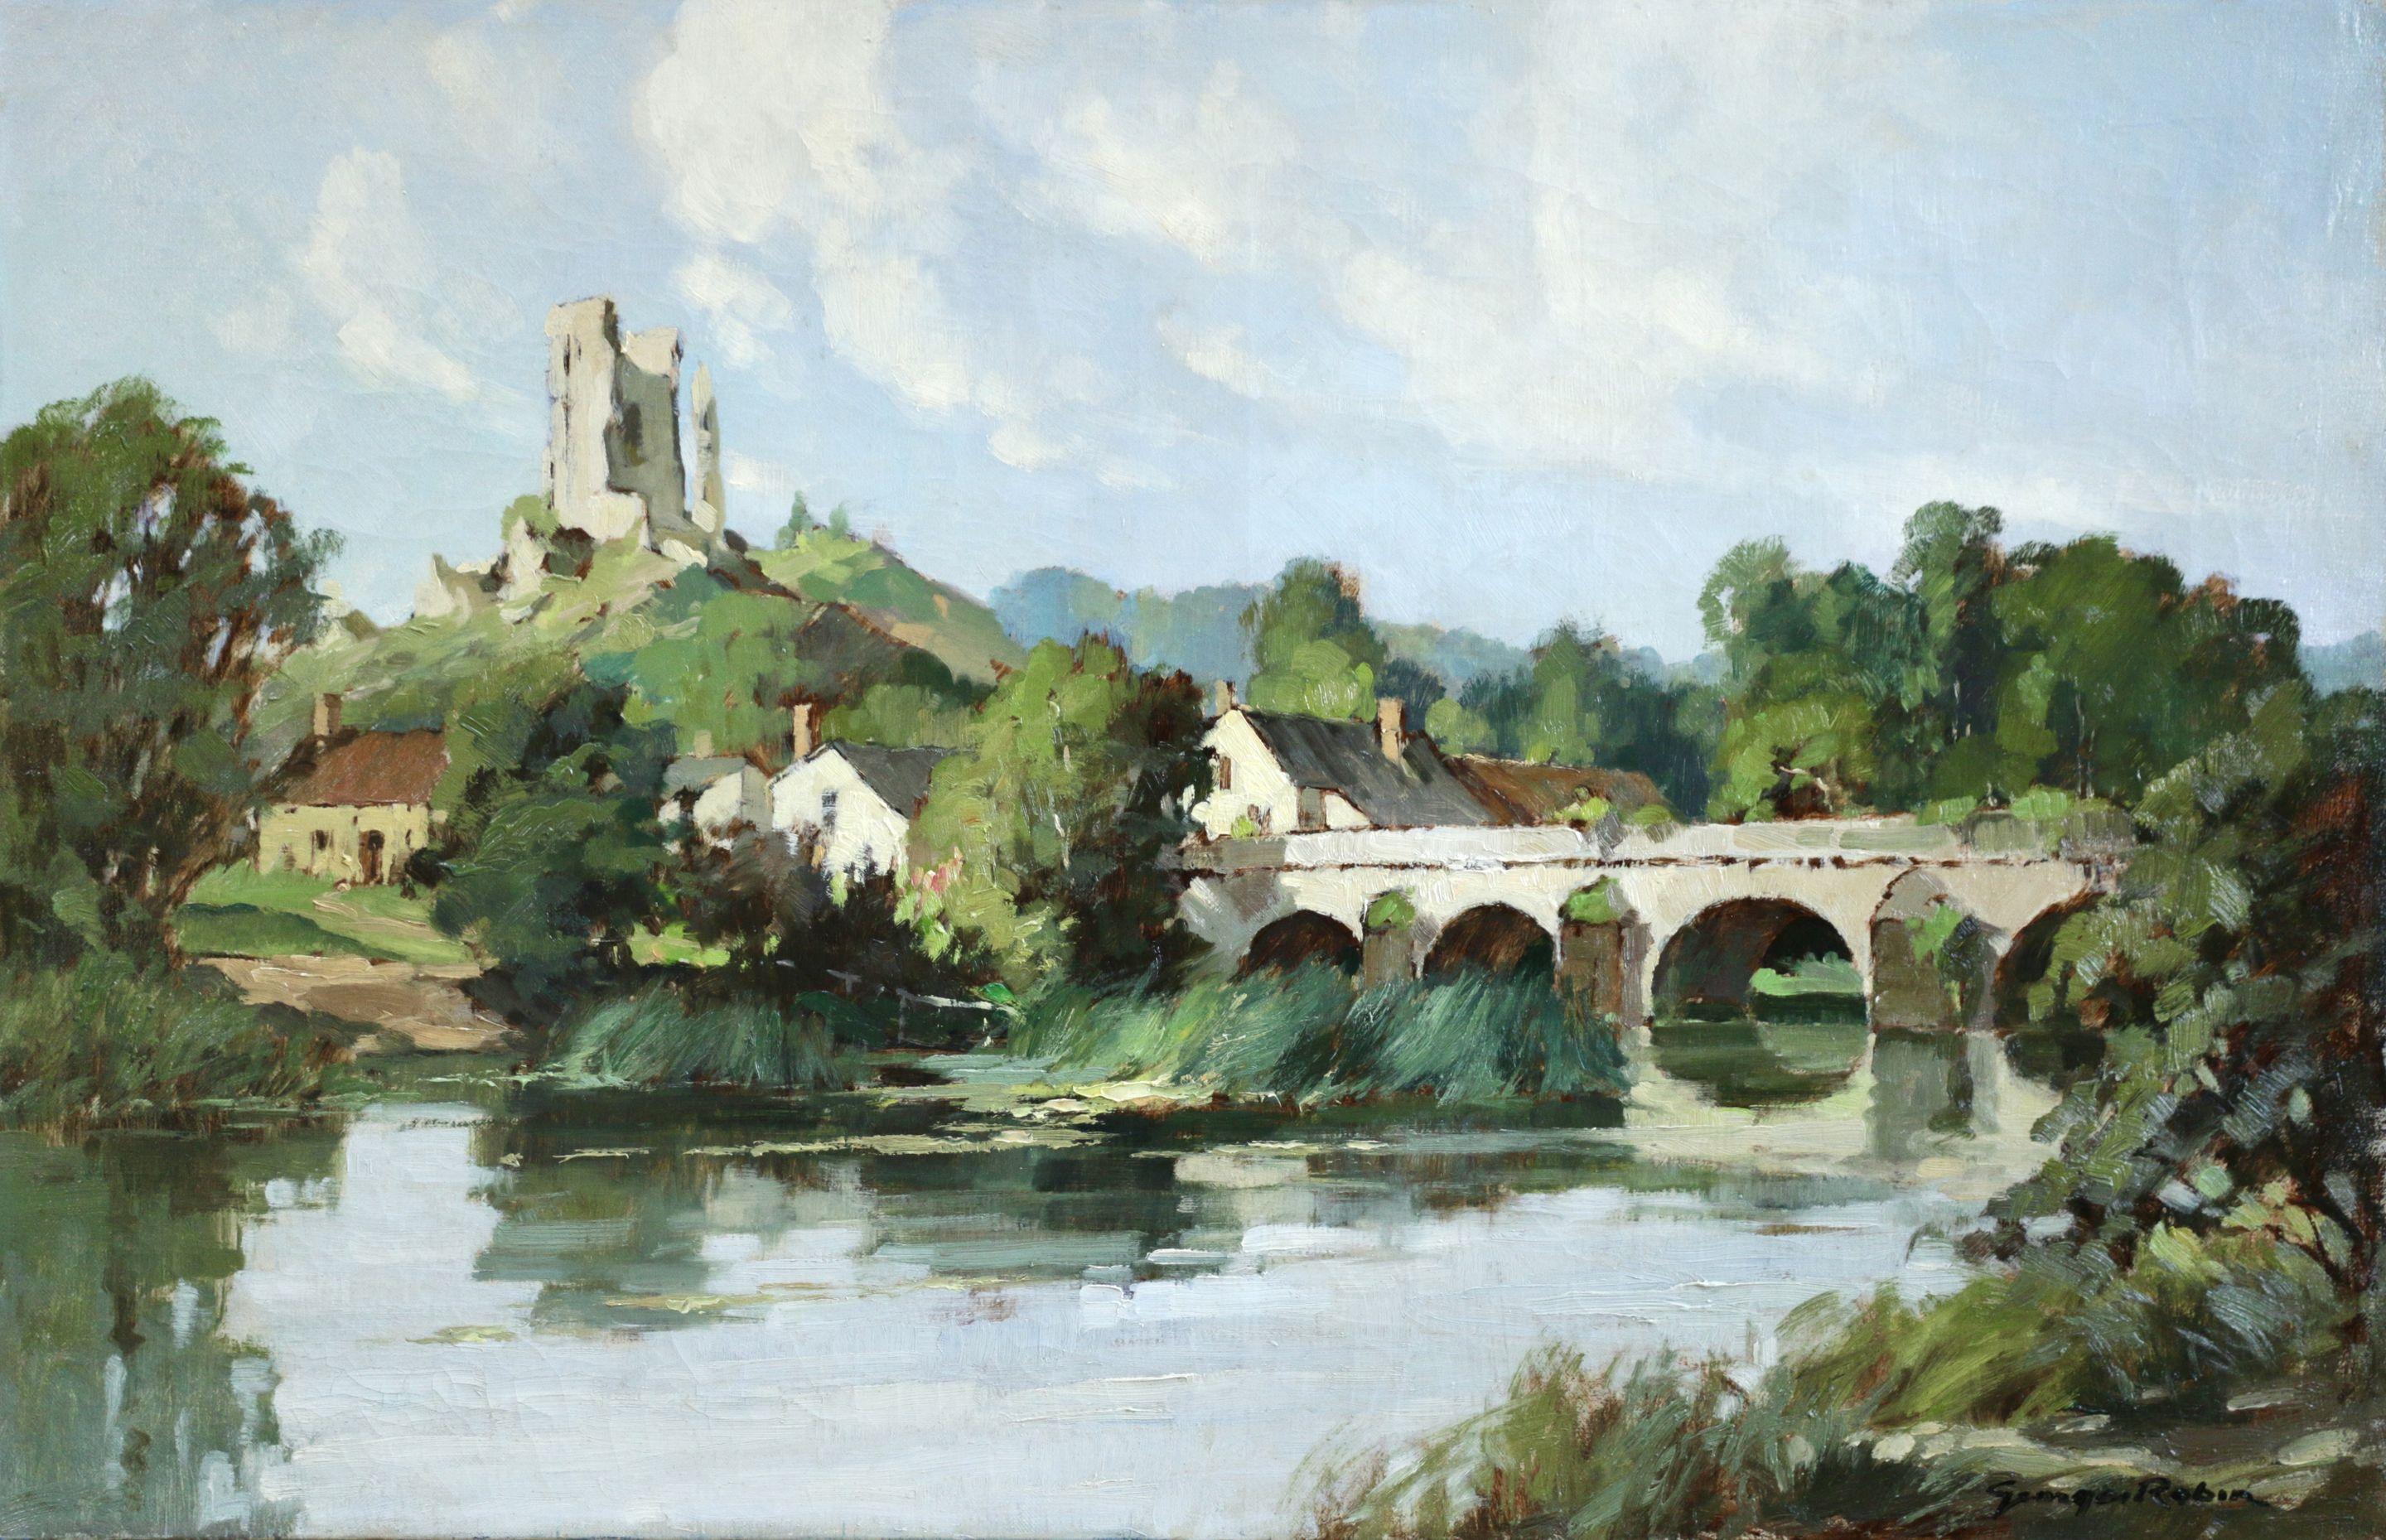 Georges Charles Robin Landscape Painting - Lavardin, Loir-et-Cher - 20th Century Oil, French Village Riverscape by Robin